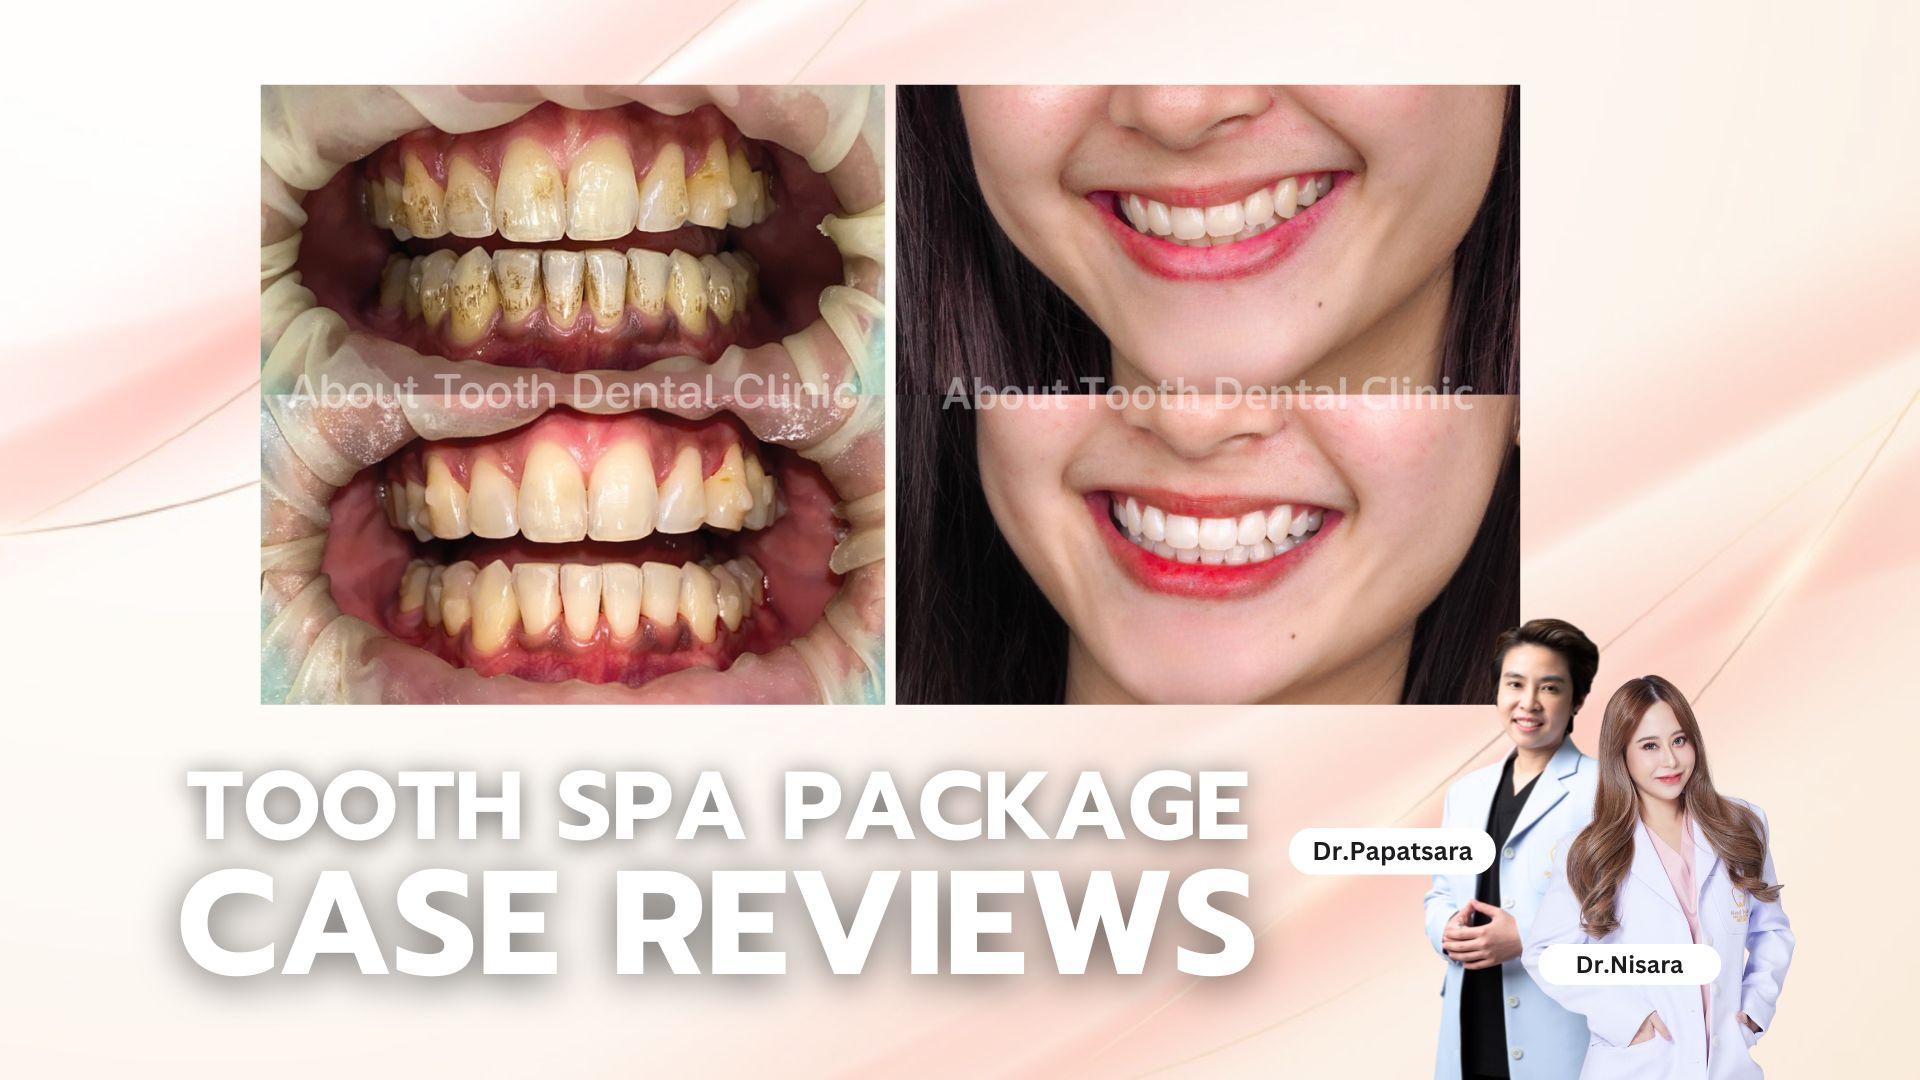 Tooth Spa Package Case Reviews